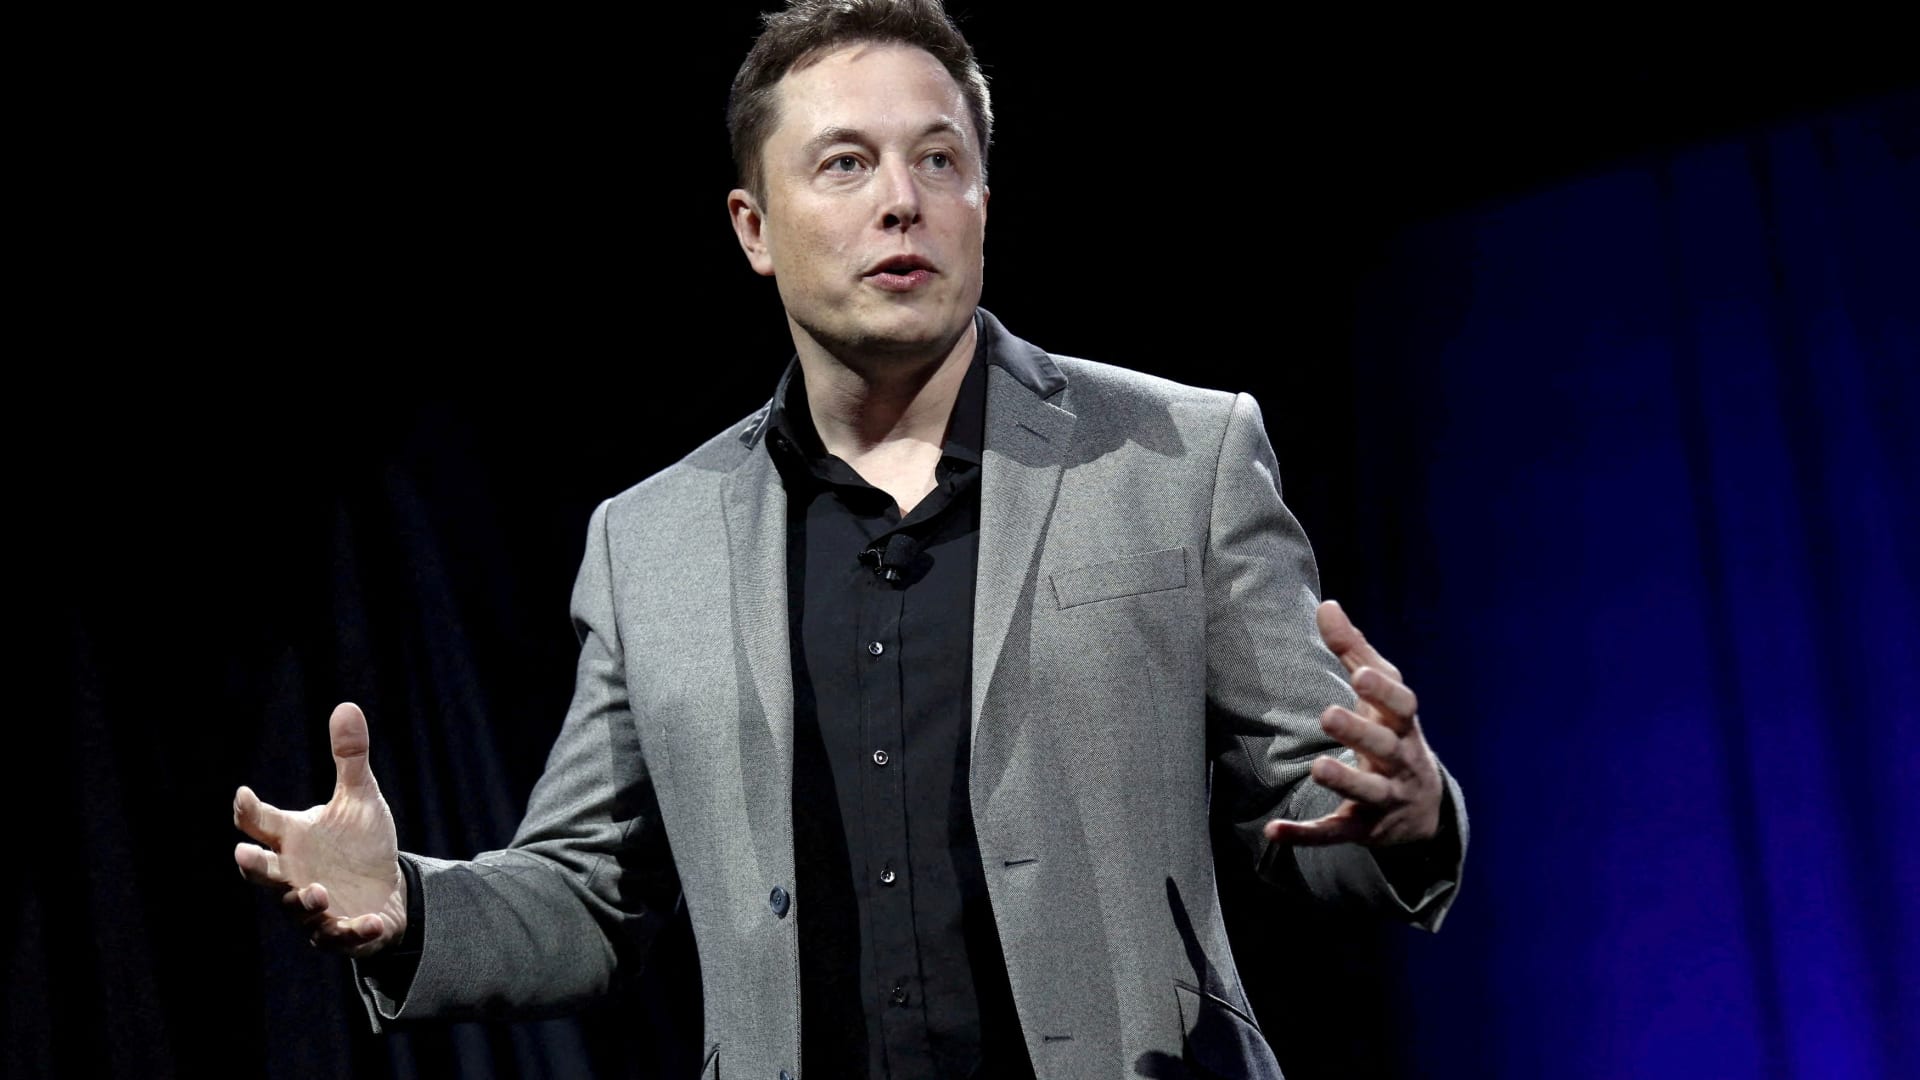 Elon Musk asks the court to reject Twitter’s request for a speedy trial